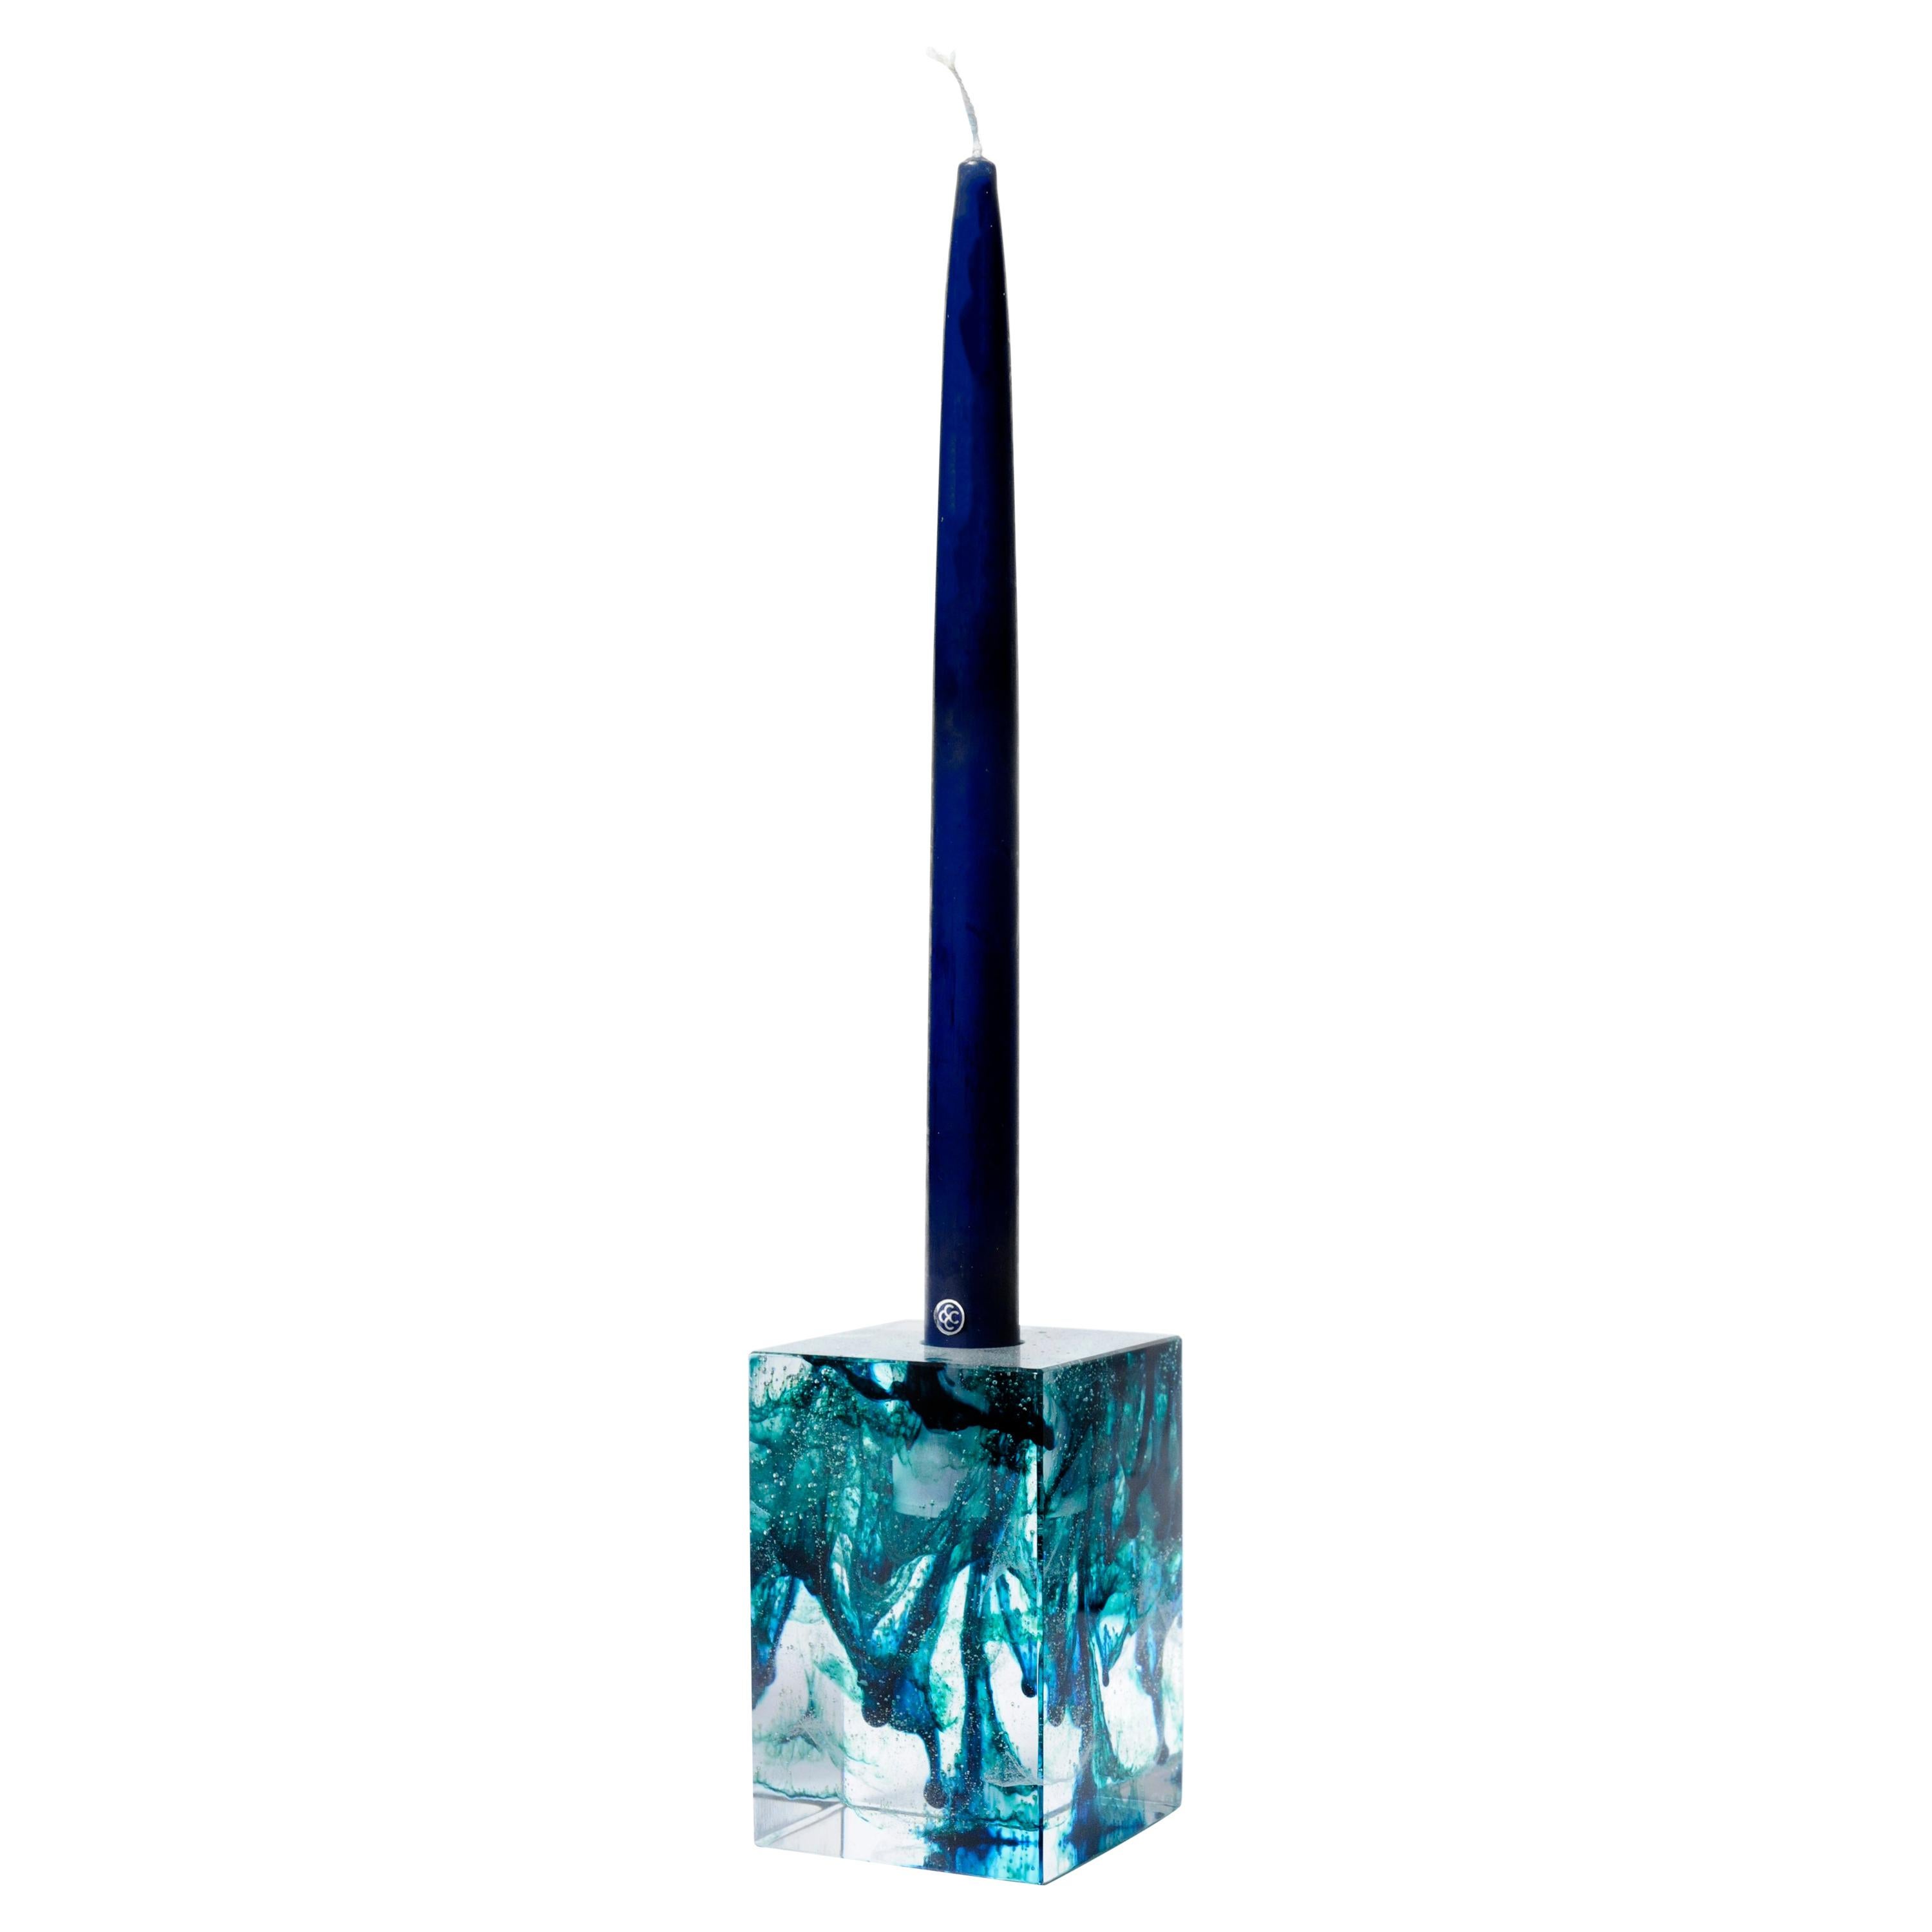 Kandlstx Colored Glass Candle Holder Square For Sale